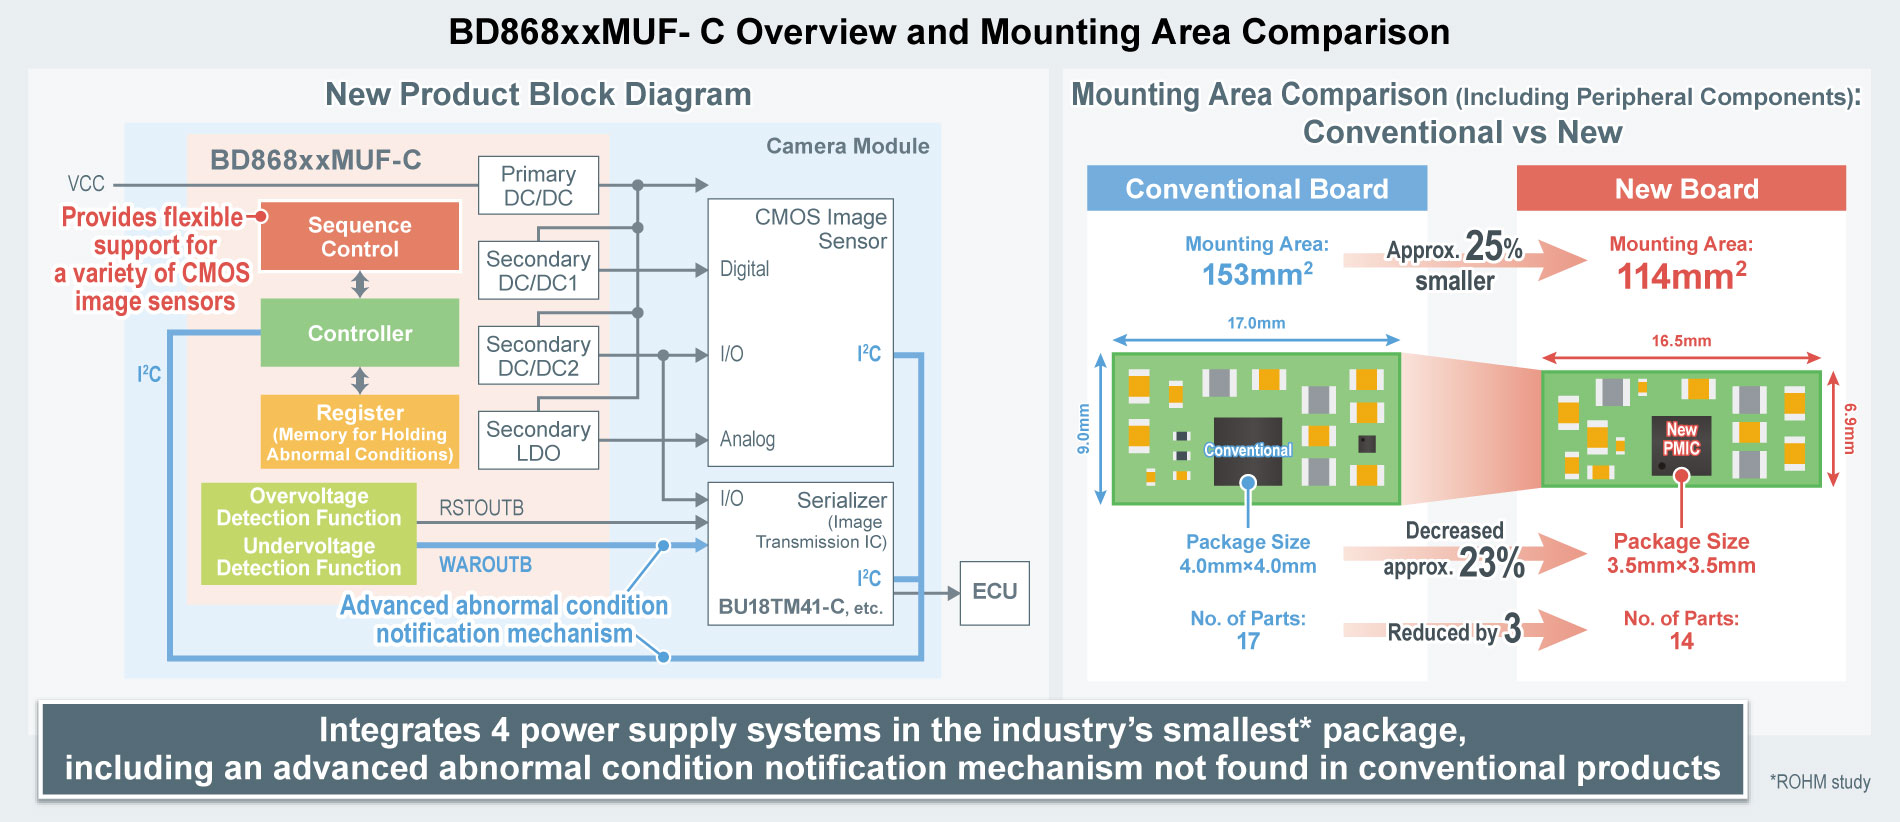 BD868xxMUF-C Overview and Mounting Area Comparison